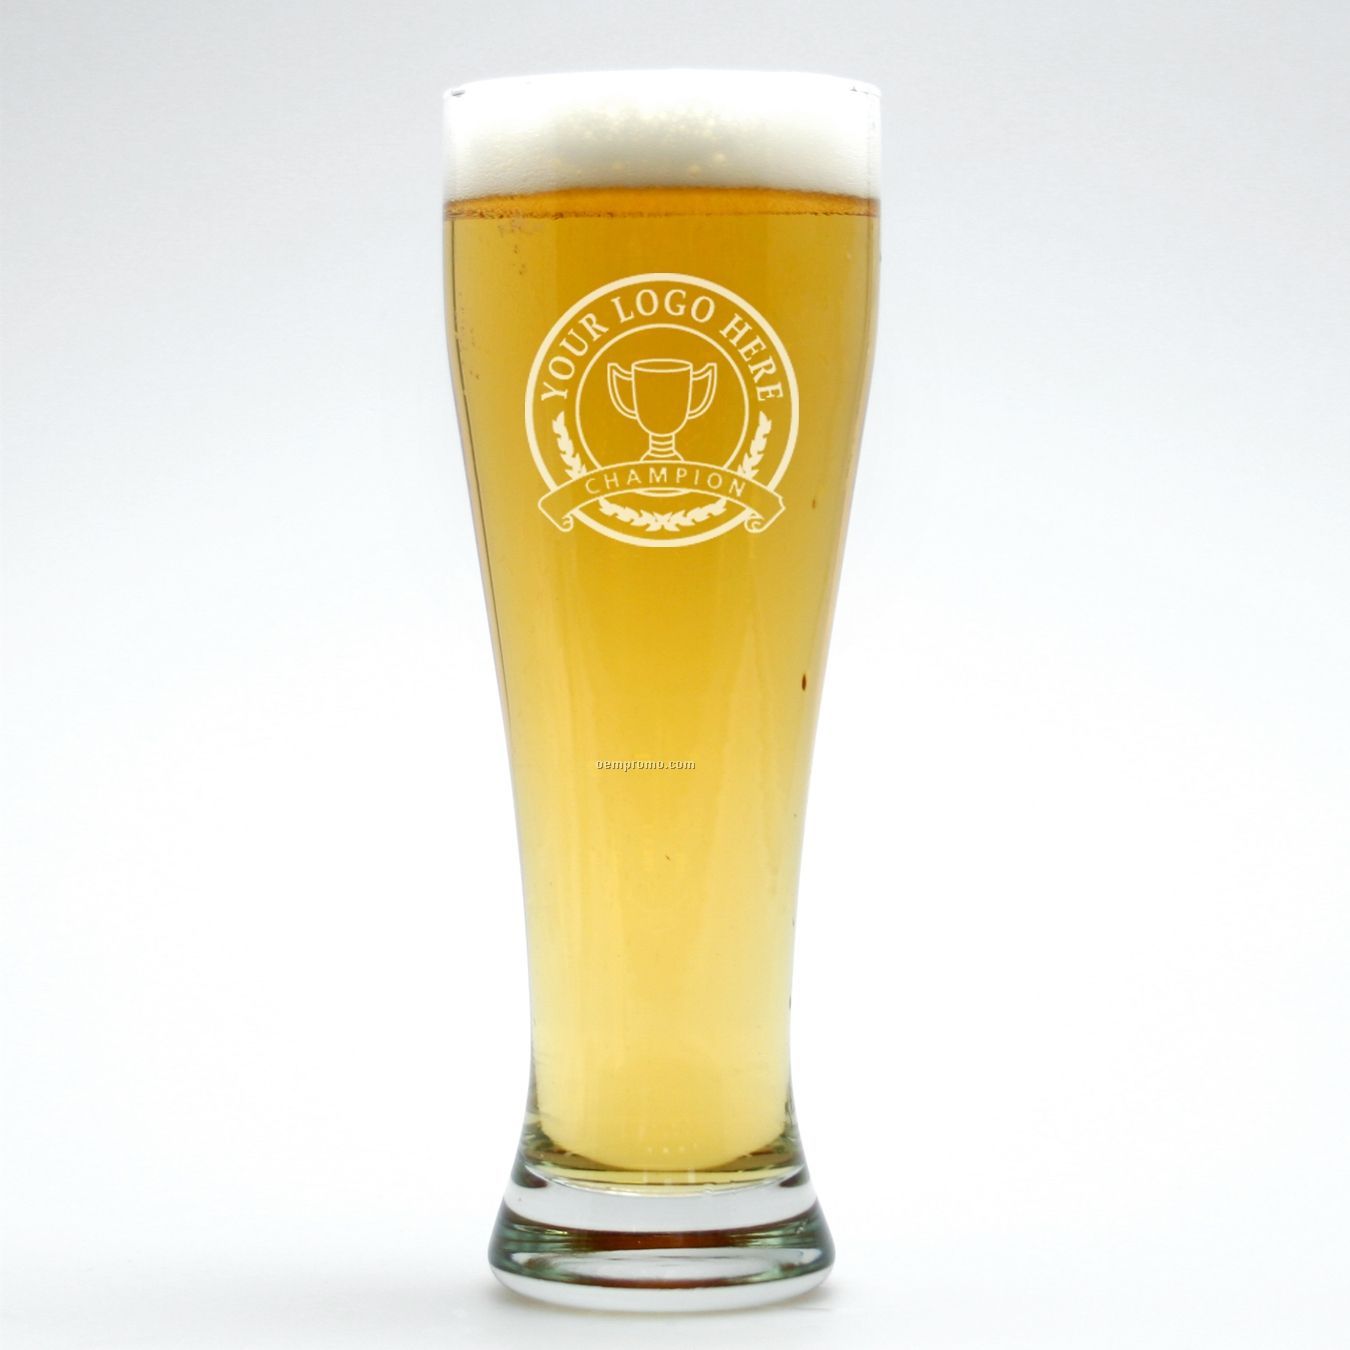 22 Oz. Signature Tall Beer Glass (Deep Etch)